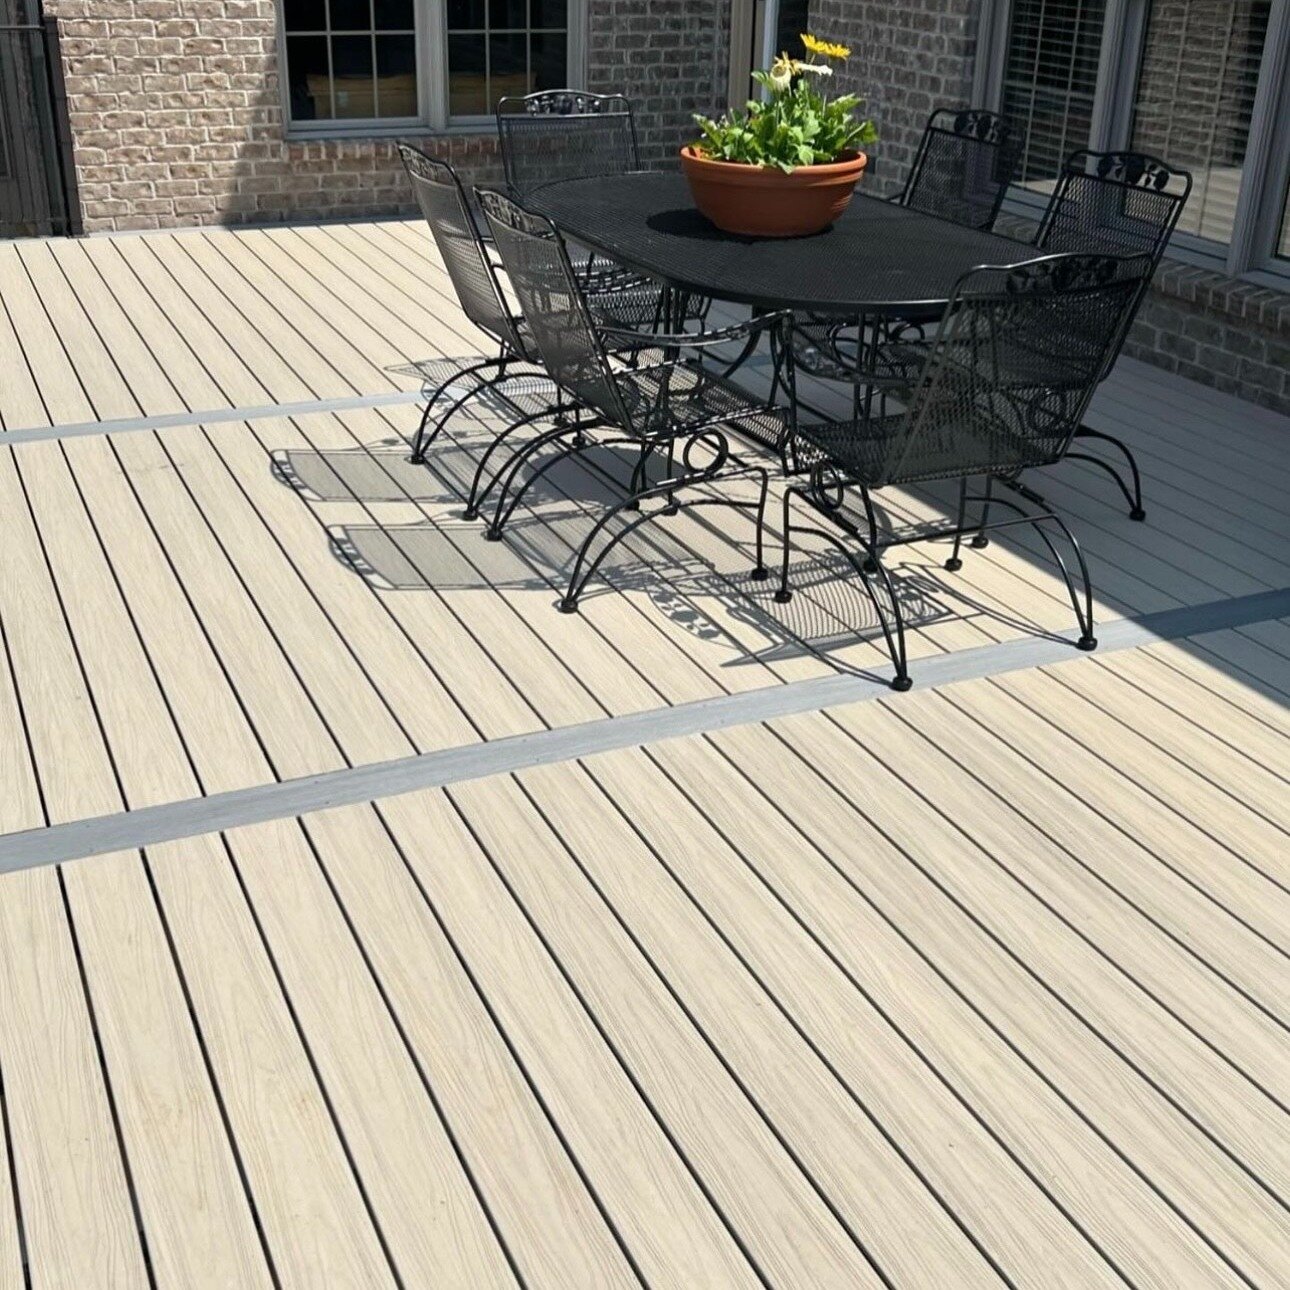 Experience the convenience of composite decking with Sylvanix Outdoor Products!

Interested to learn more? 
Take a look at our website for information, resources, and inspiration for your next project!👇

https://sylvanix.com

#sylvanixspaces #SandDu